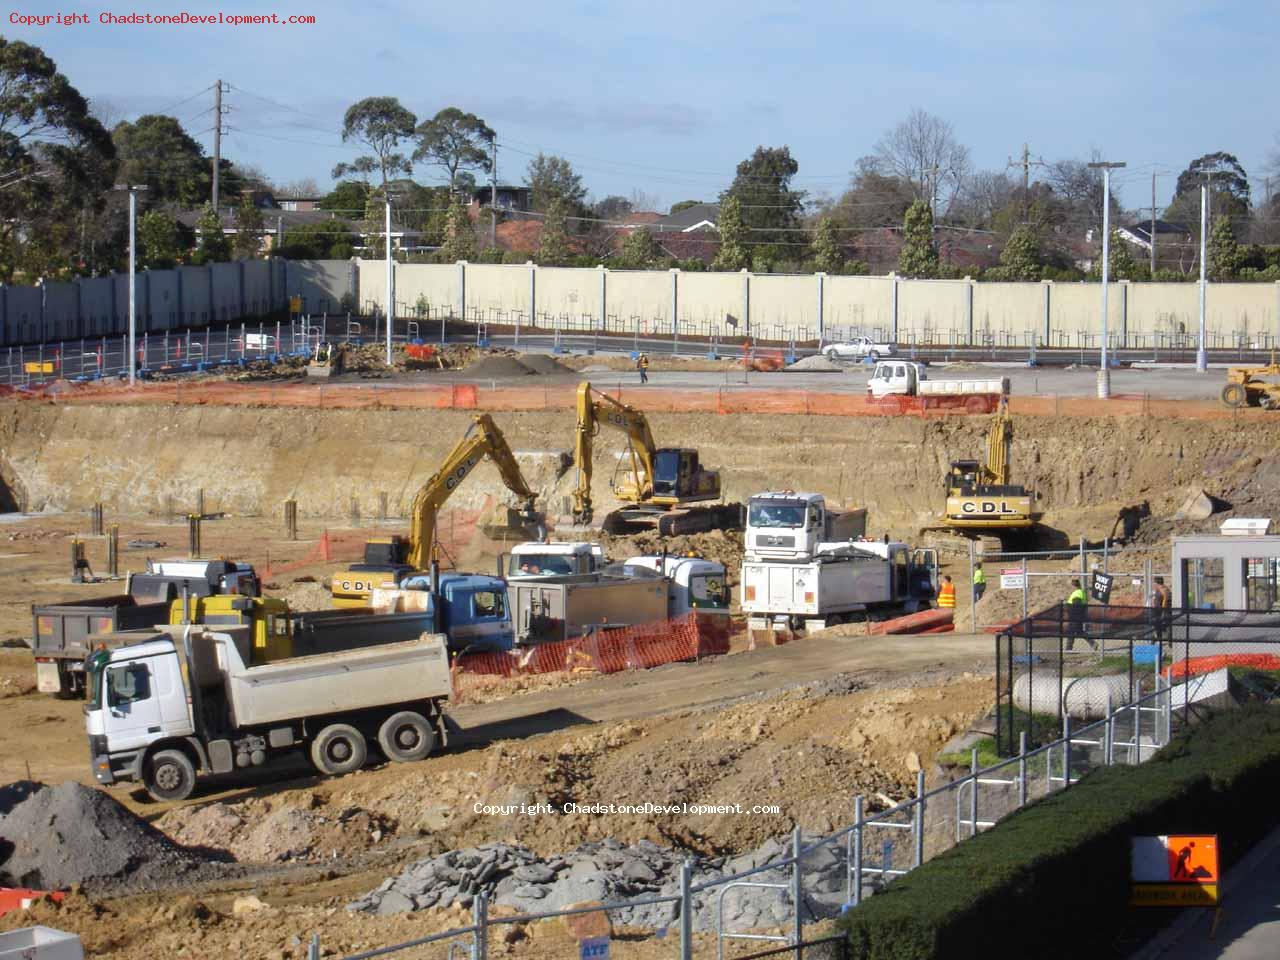 Closeup of carpark constructions - Chadstone Development Discussions Gallery